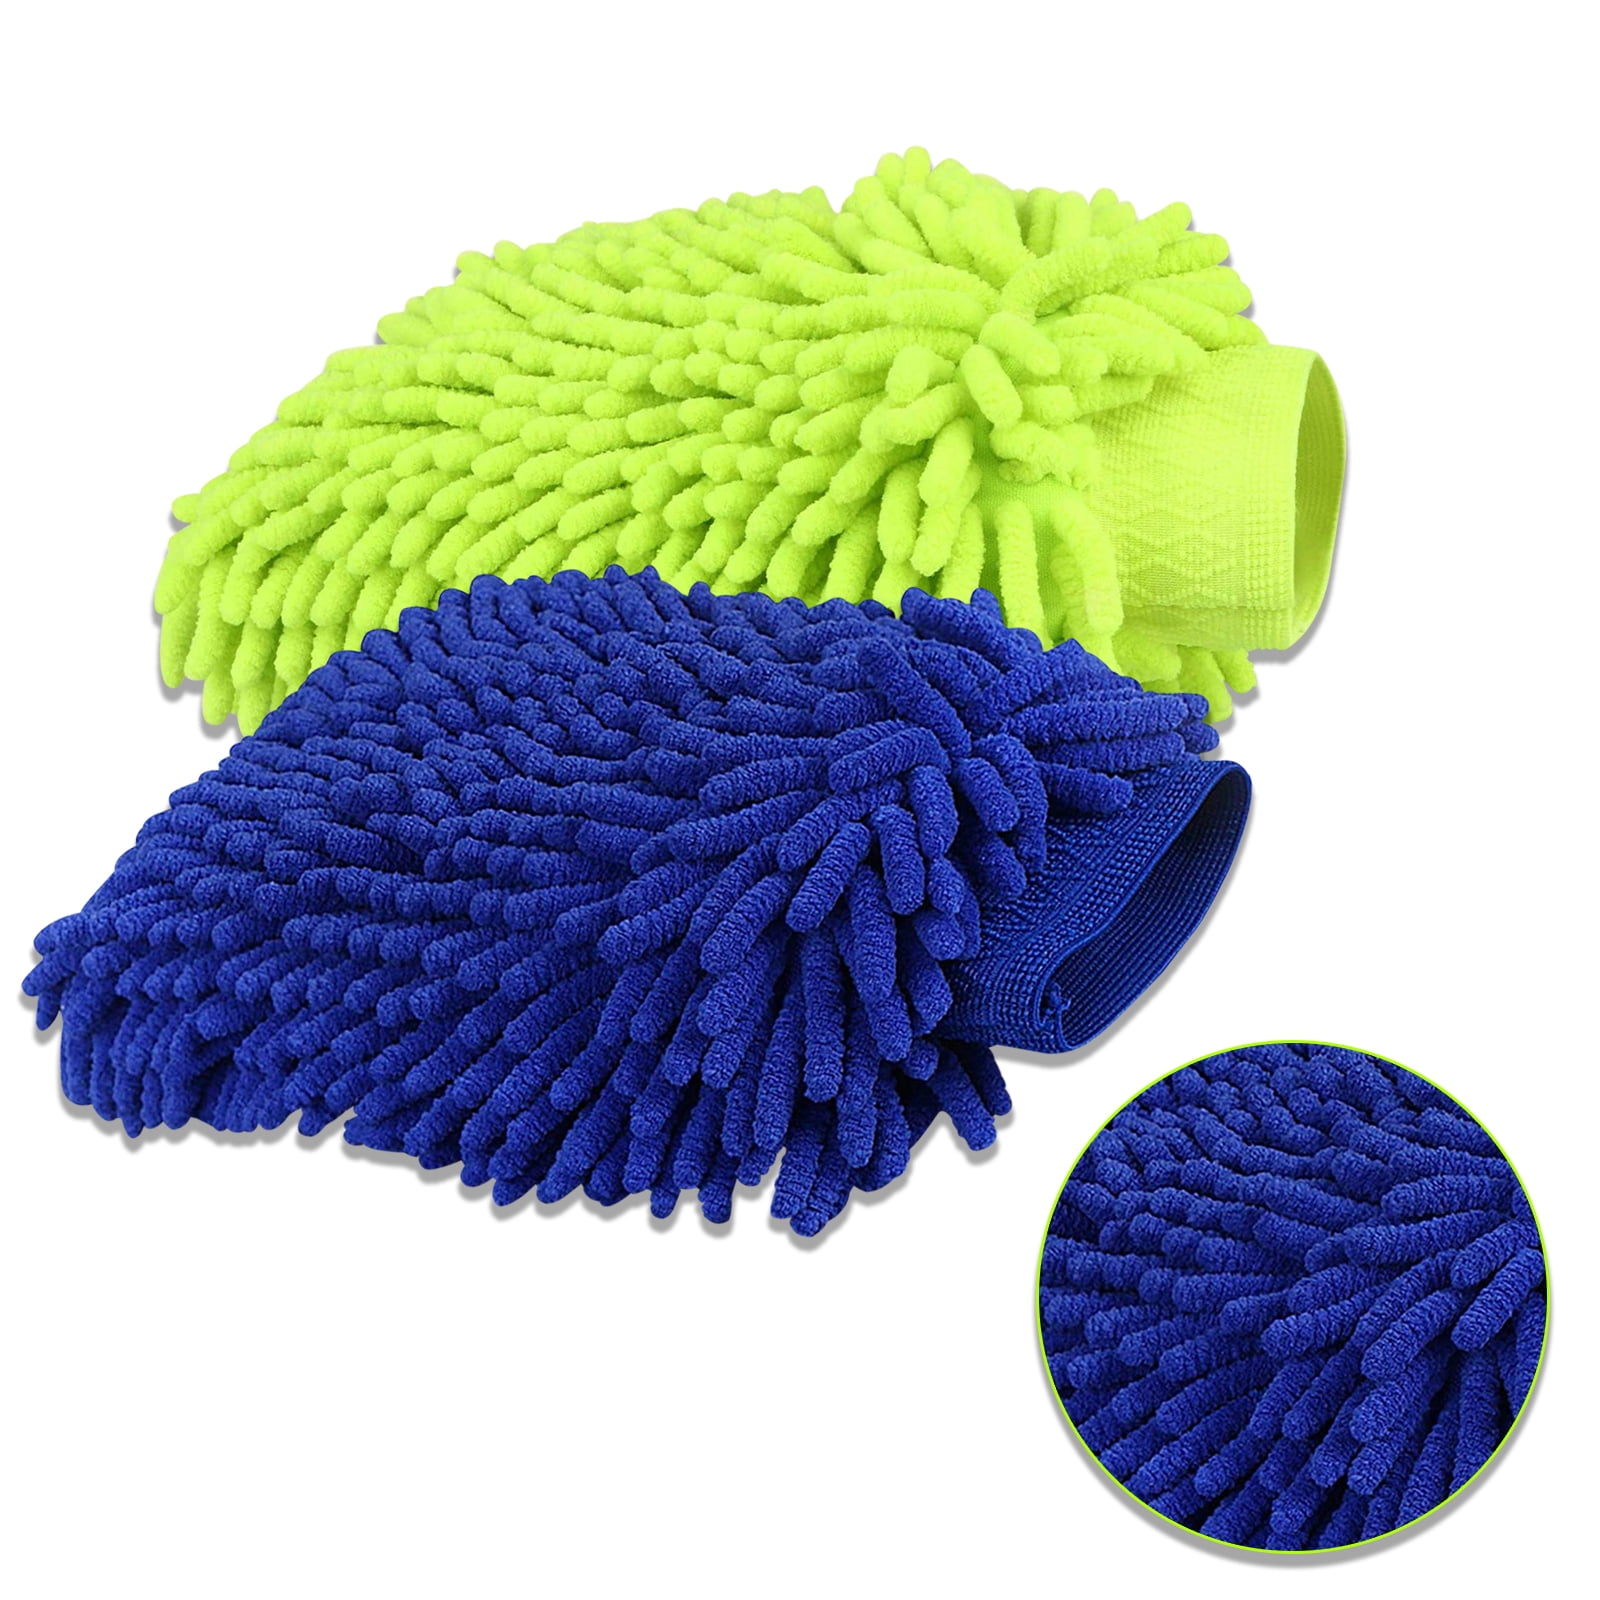 Blue BOUNDAIR 3 Pcs Car Wash Mitts Cleaning Gloves Equipment Sponges Double Sided Microfiber Car Wash Mitts Super Absorbent Microfibre Gloves Microfibre Cloth 